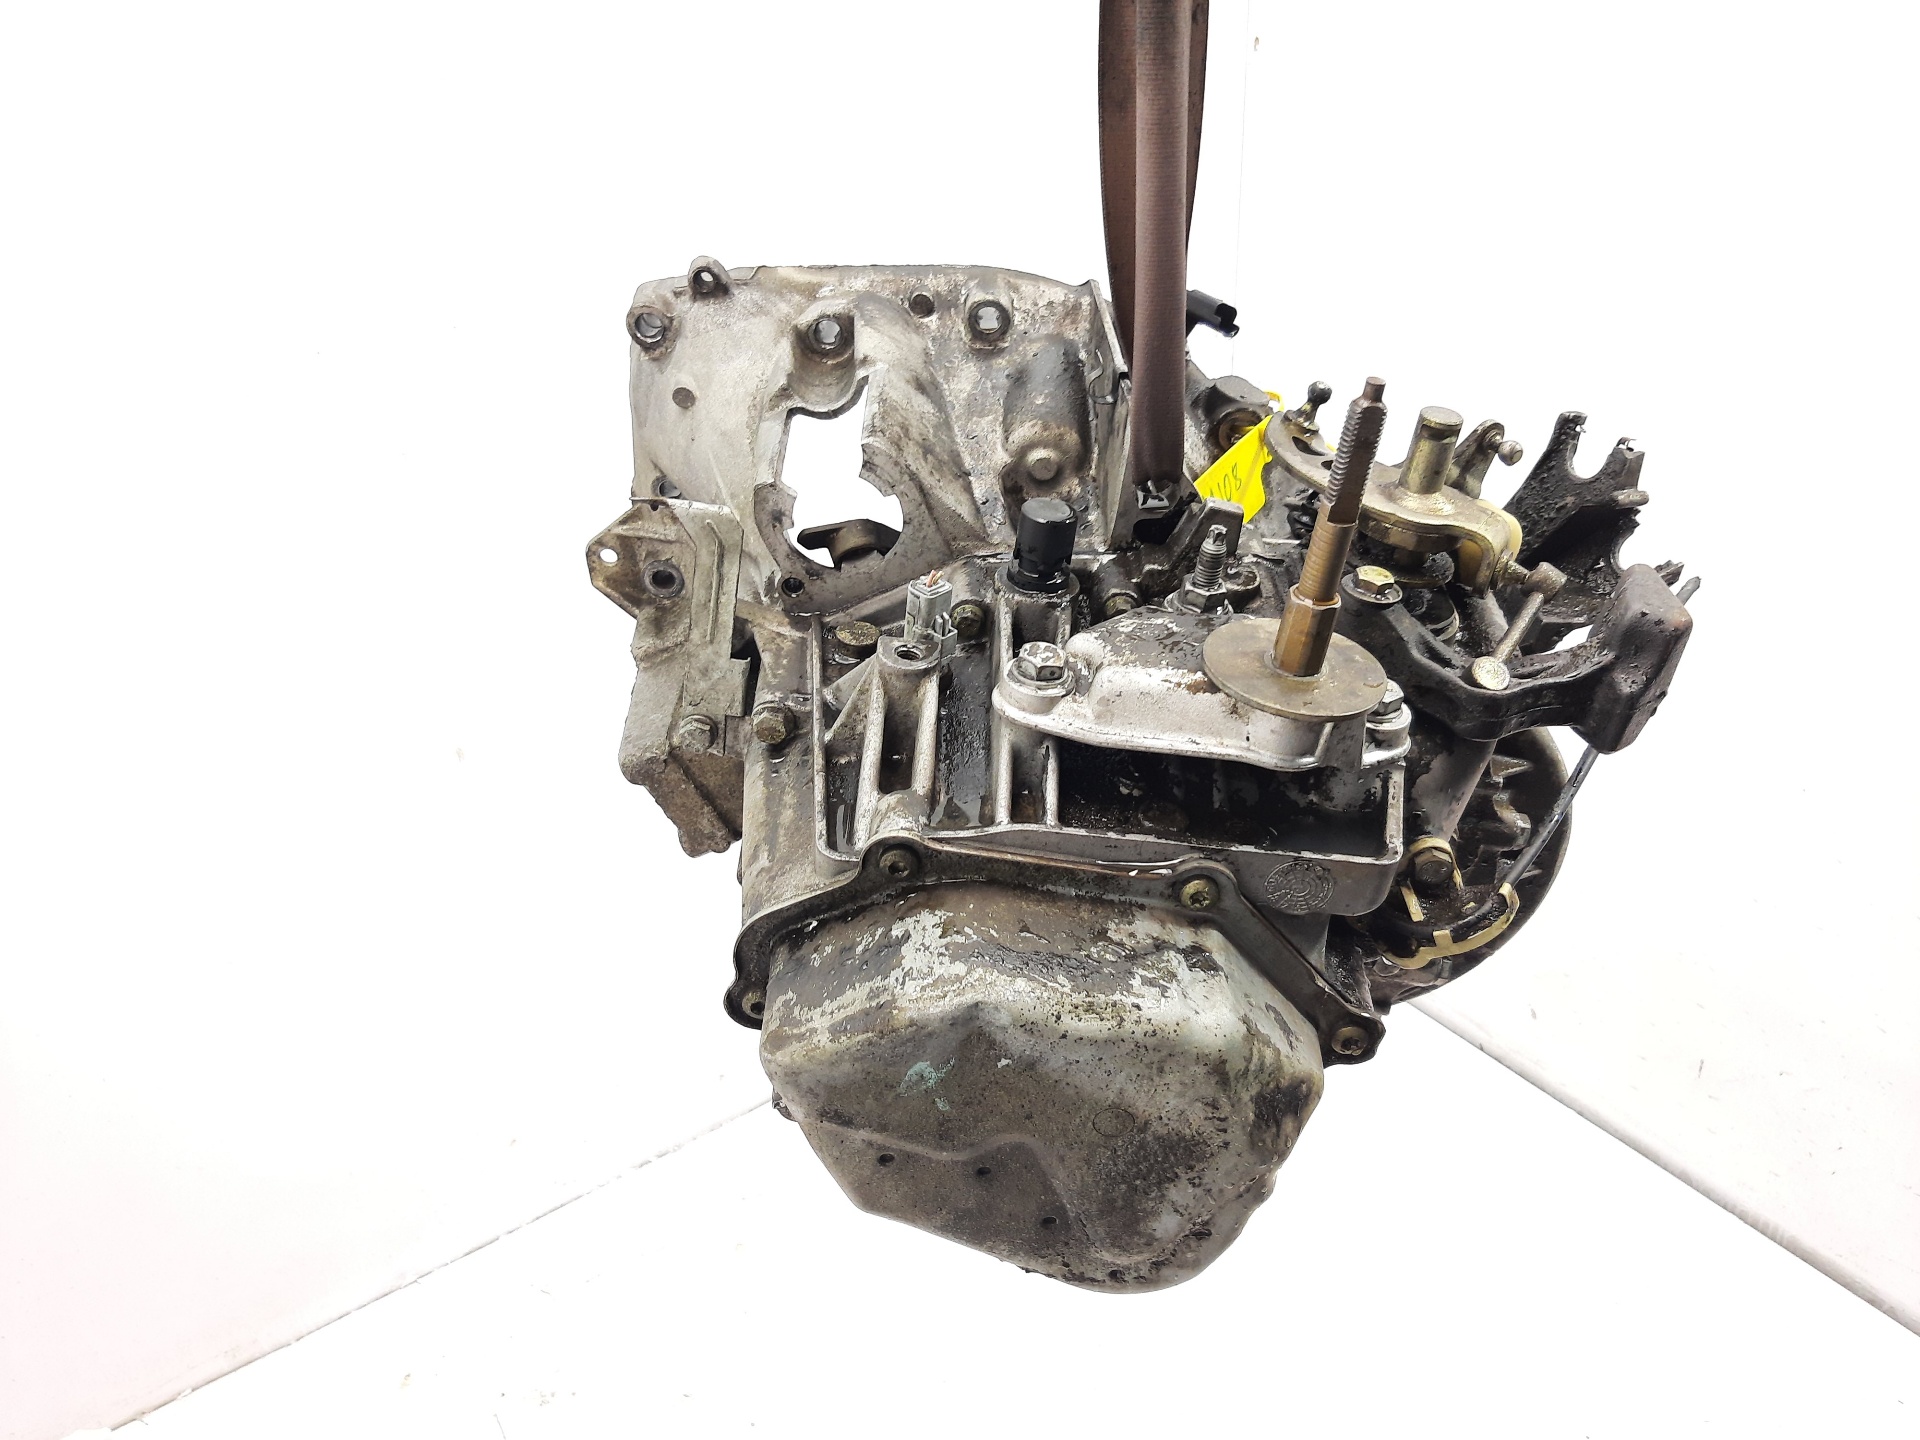 PEUGEOT 406 1 generation (1995-2004) Gearbox 20LM22, 5VELOCIDADES 24153768